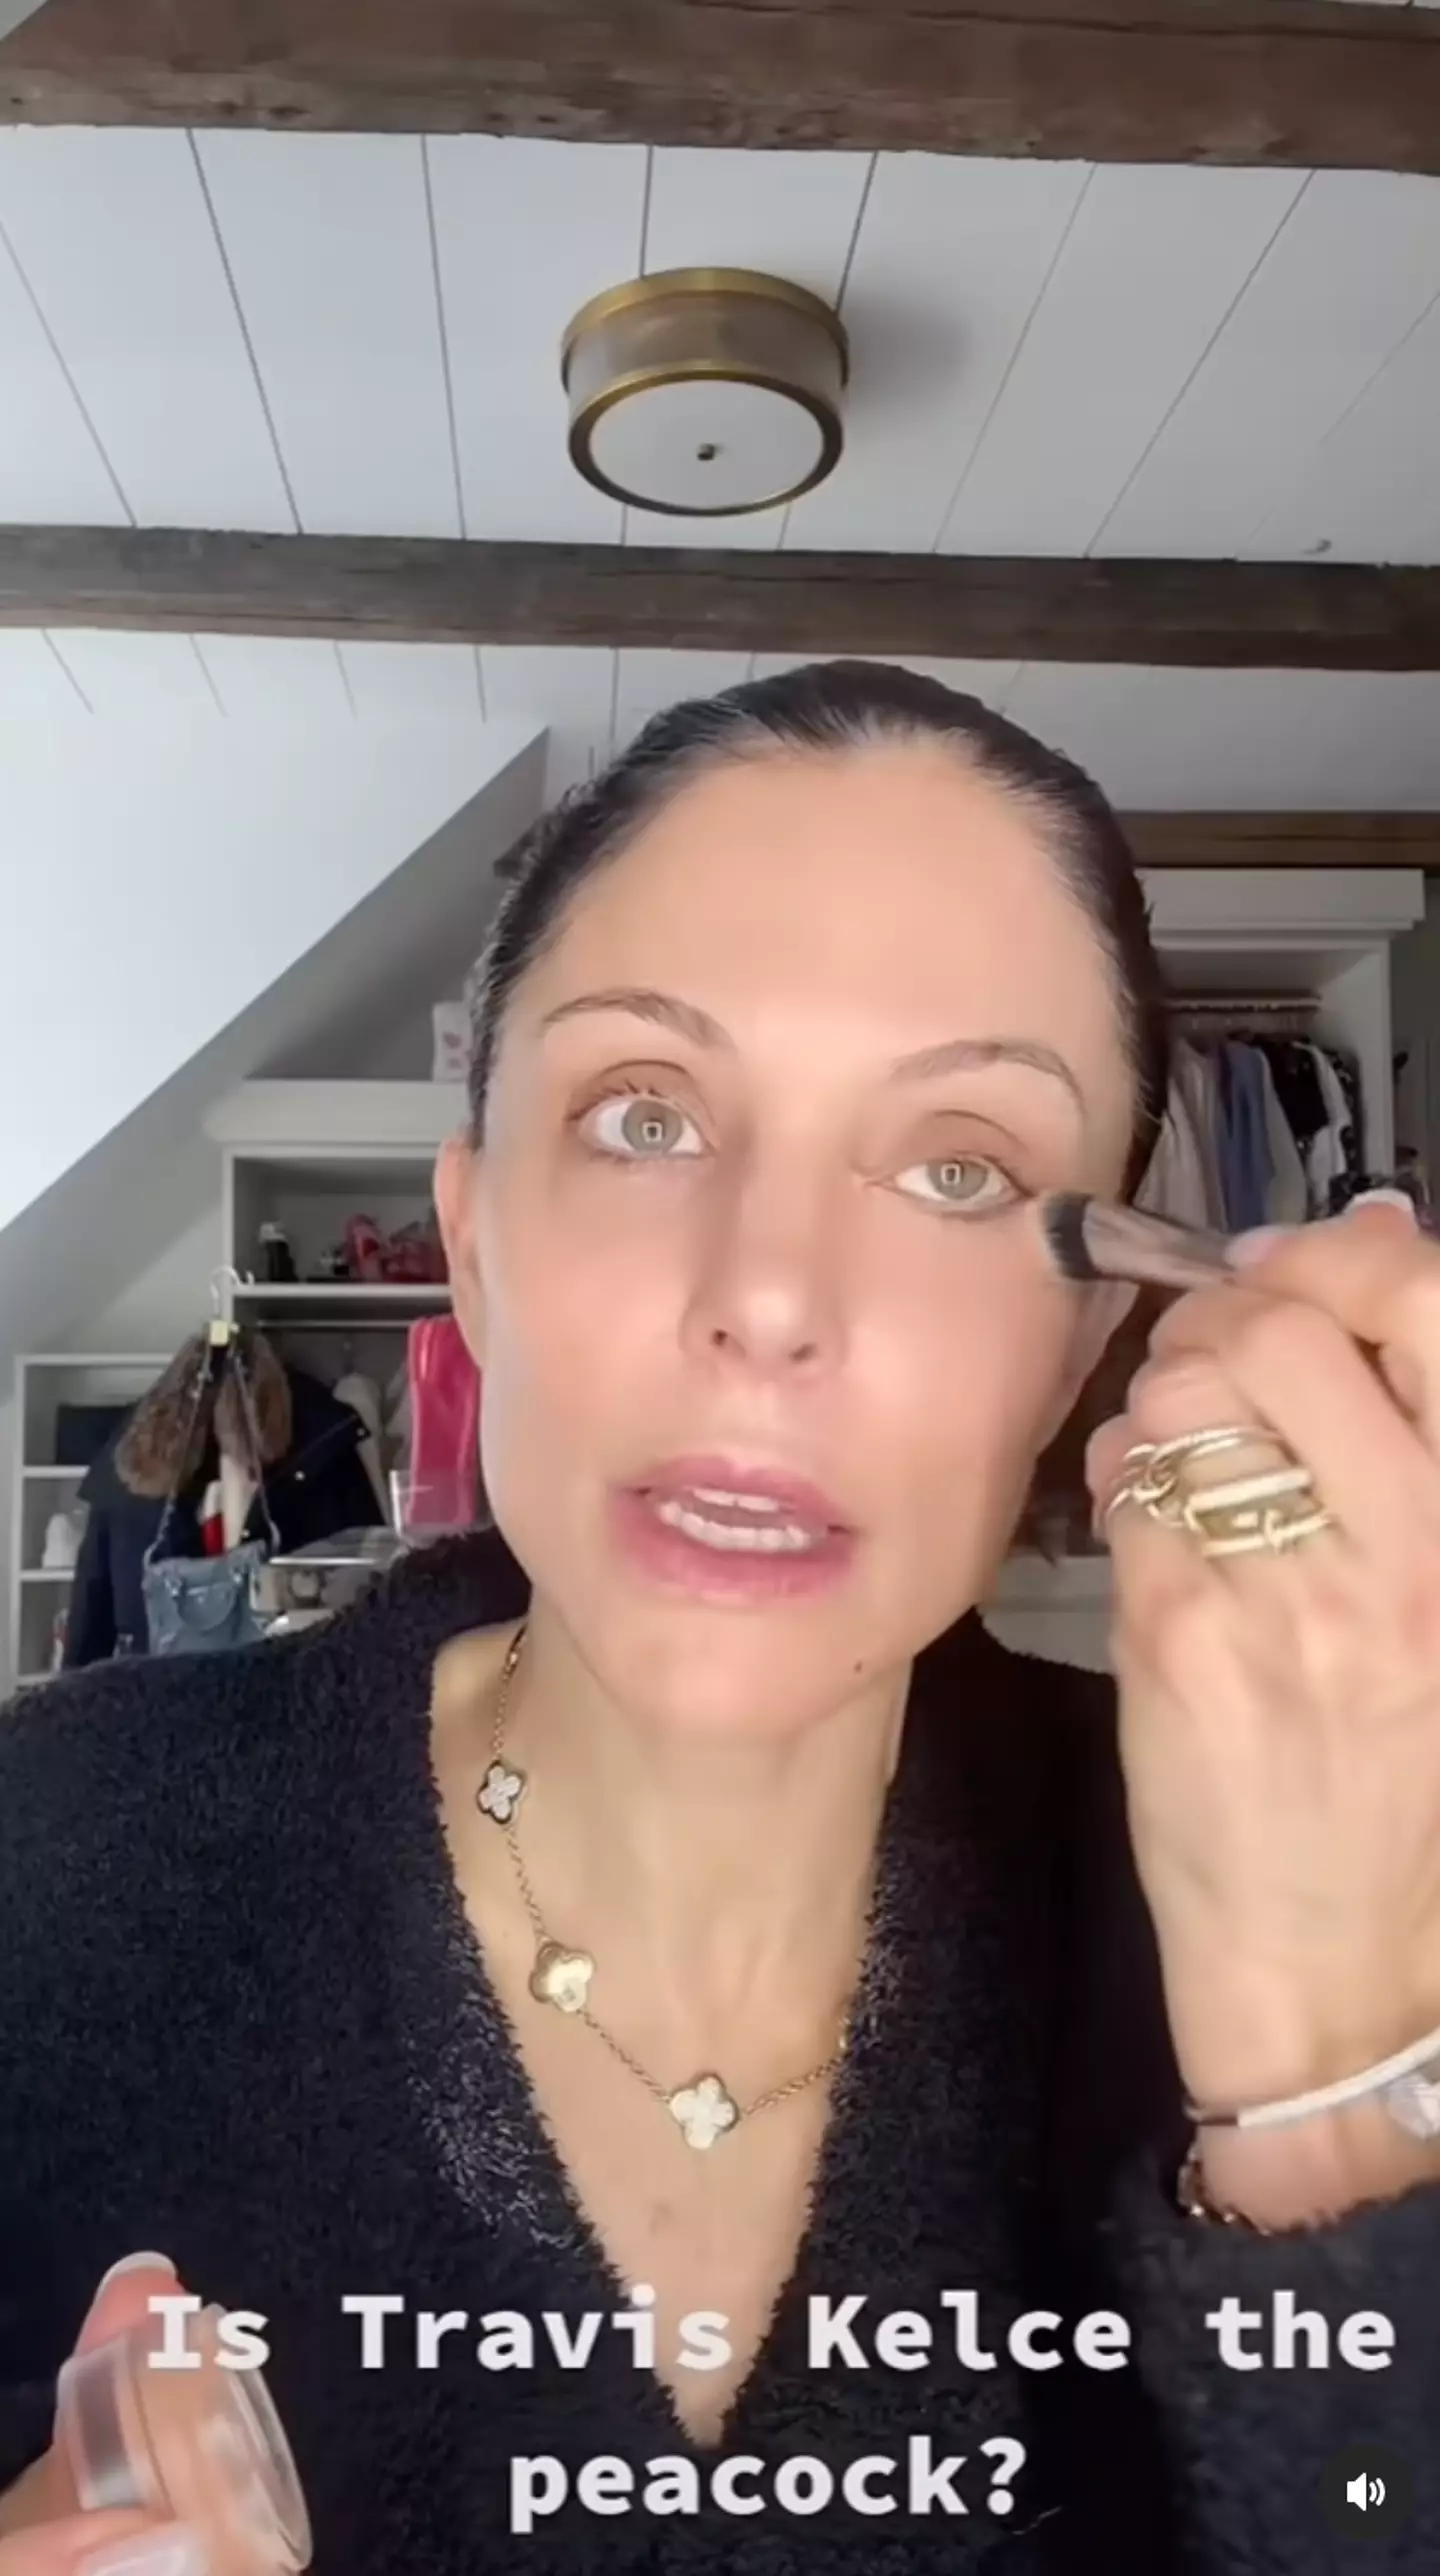 Bethenny Frankel likened Travis Kelce to one of her ex-boyfriends in a new video.